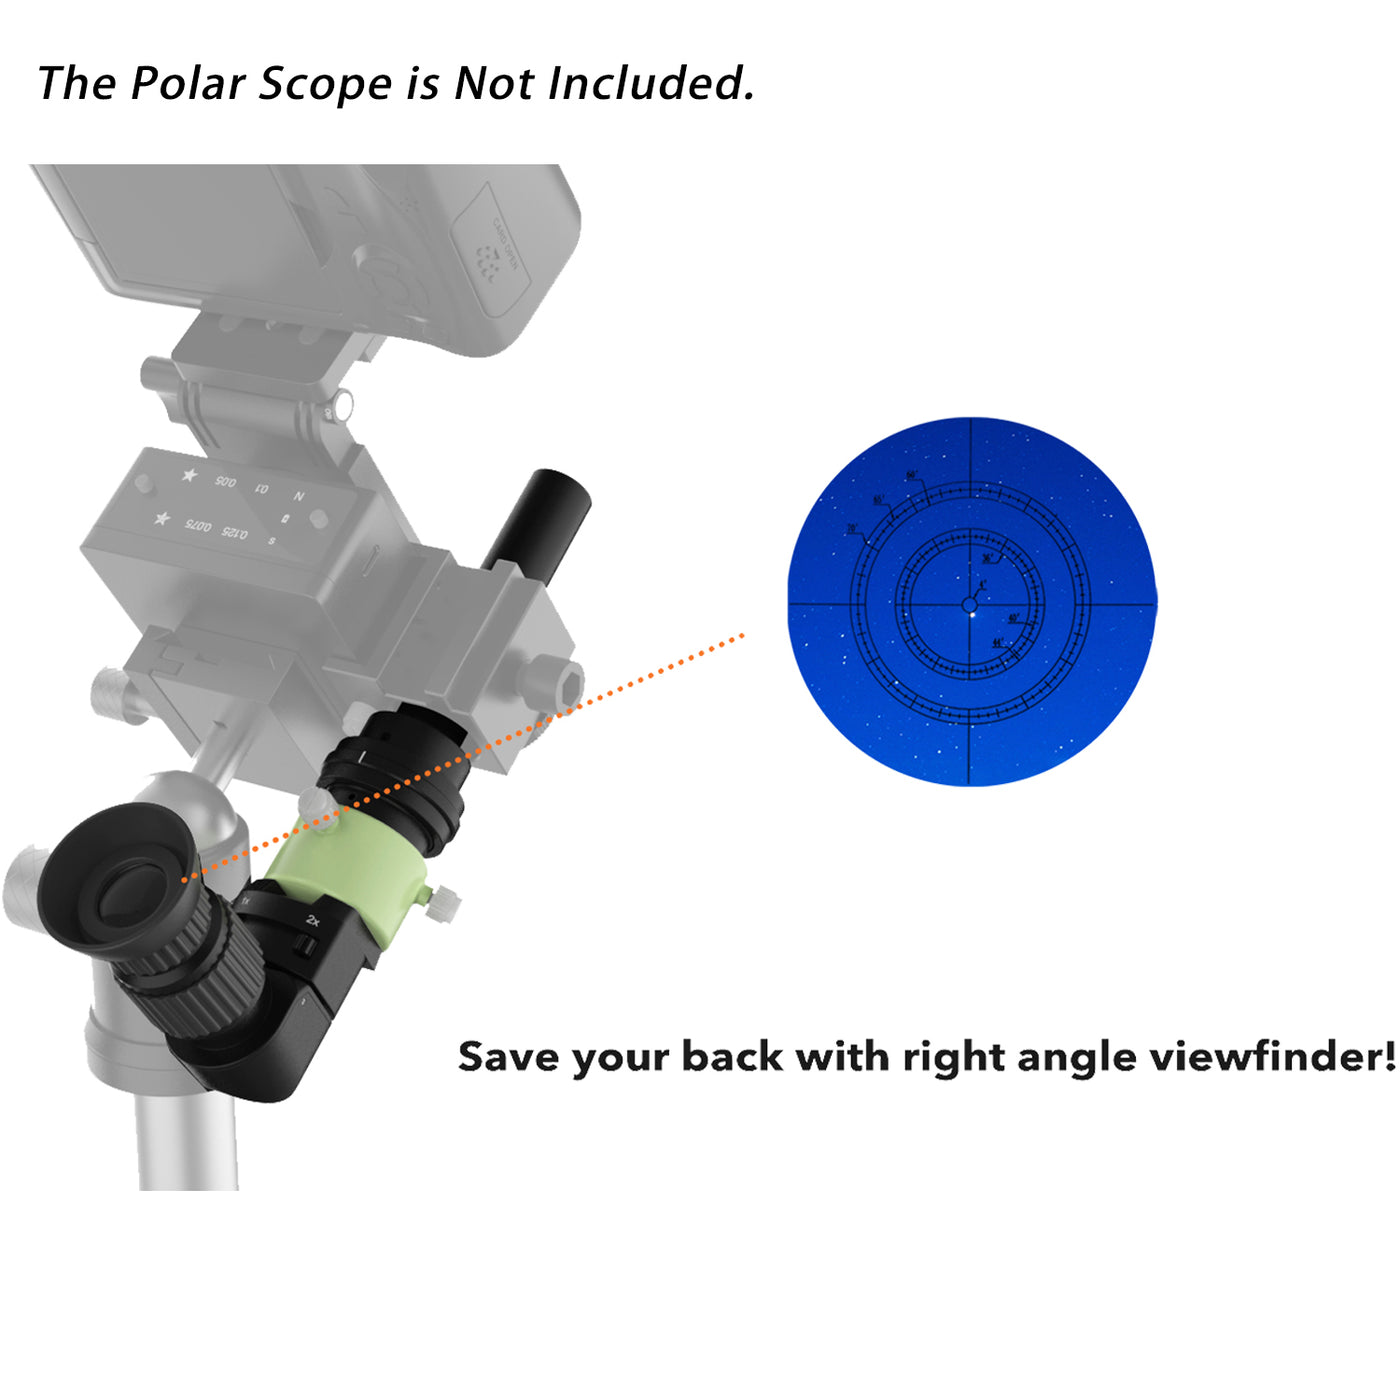 Back Saver - Right Angle Viewfinder for Polarscope - The best gift for you and your loved ones 🎁